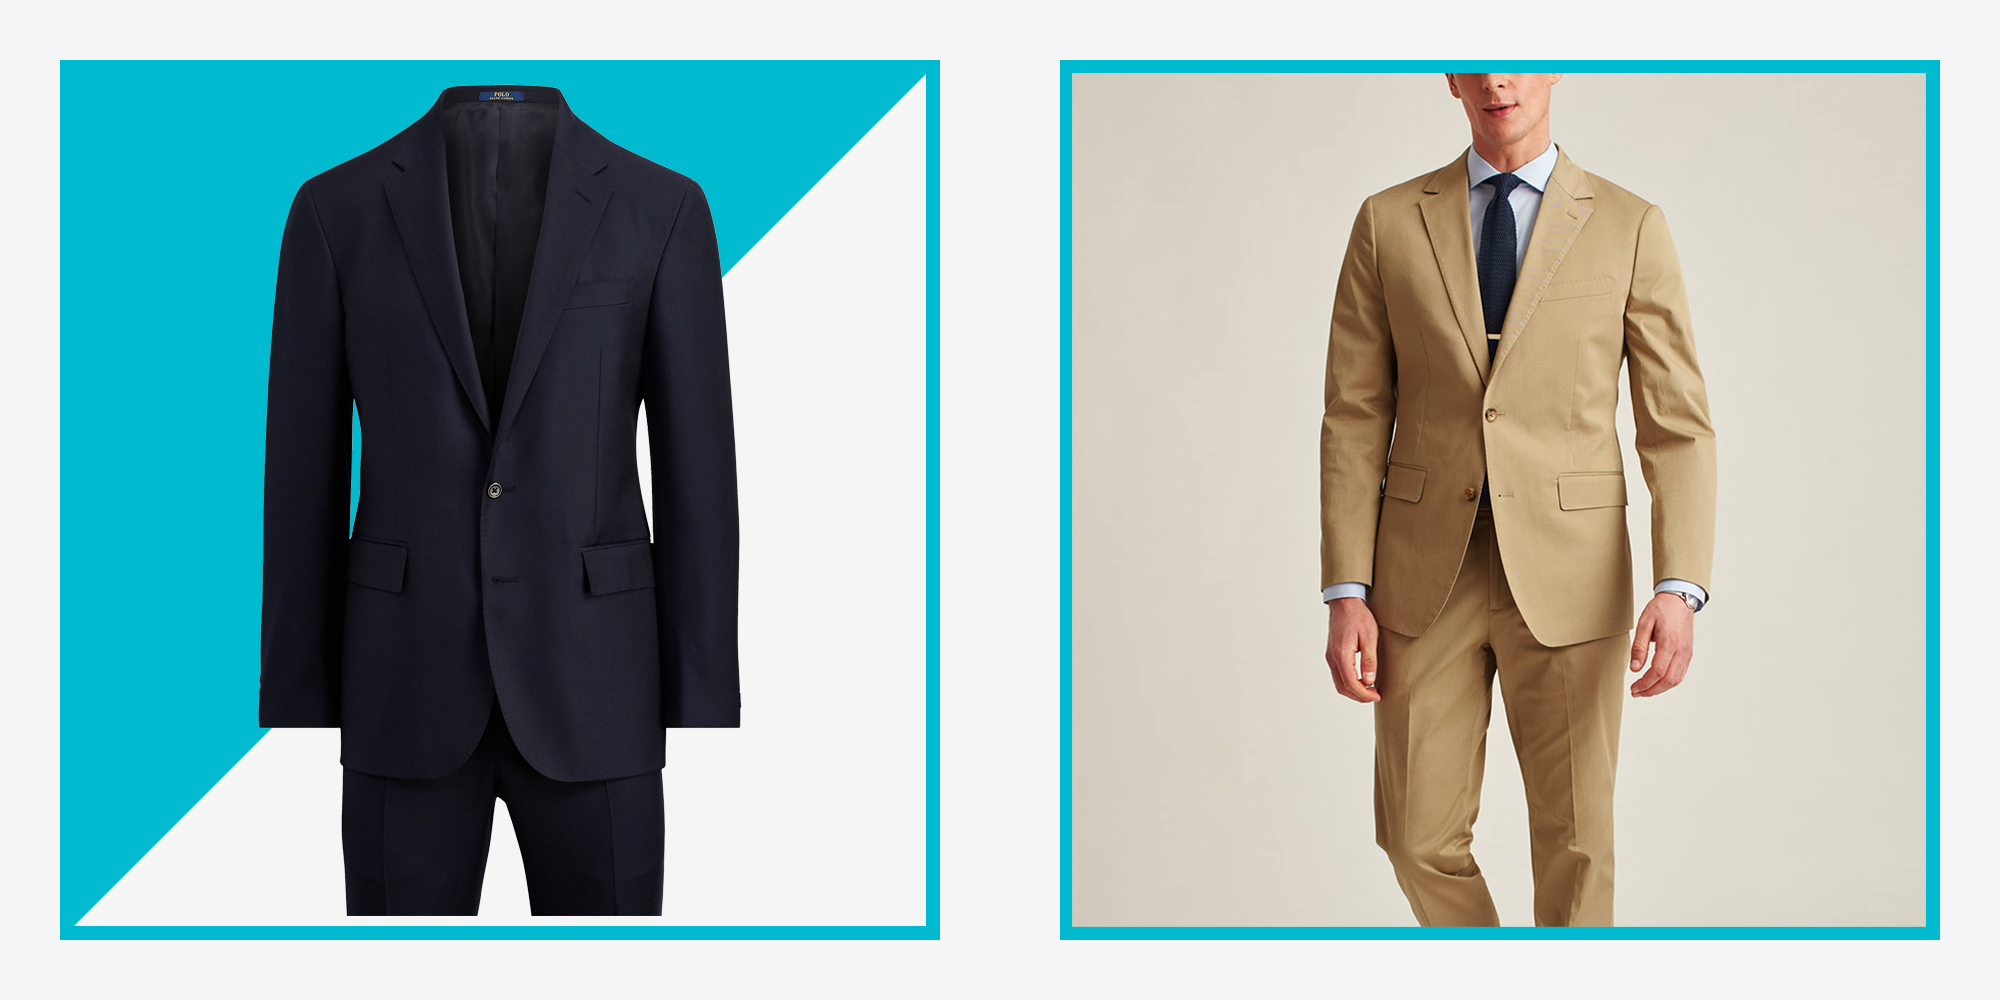 Autumn Wedding Suit Ideas for Groom: Look Your Best This Season!